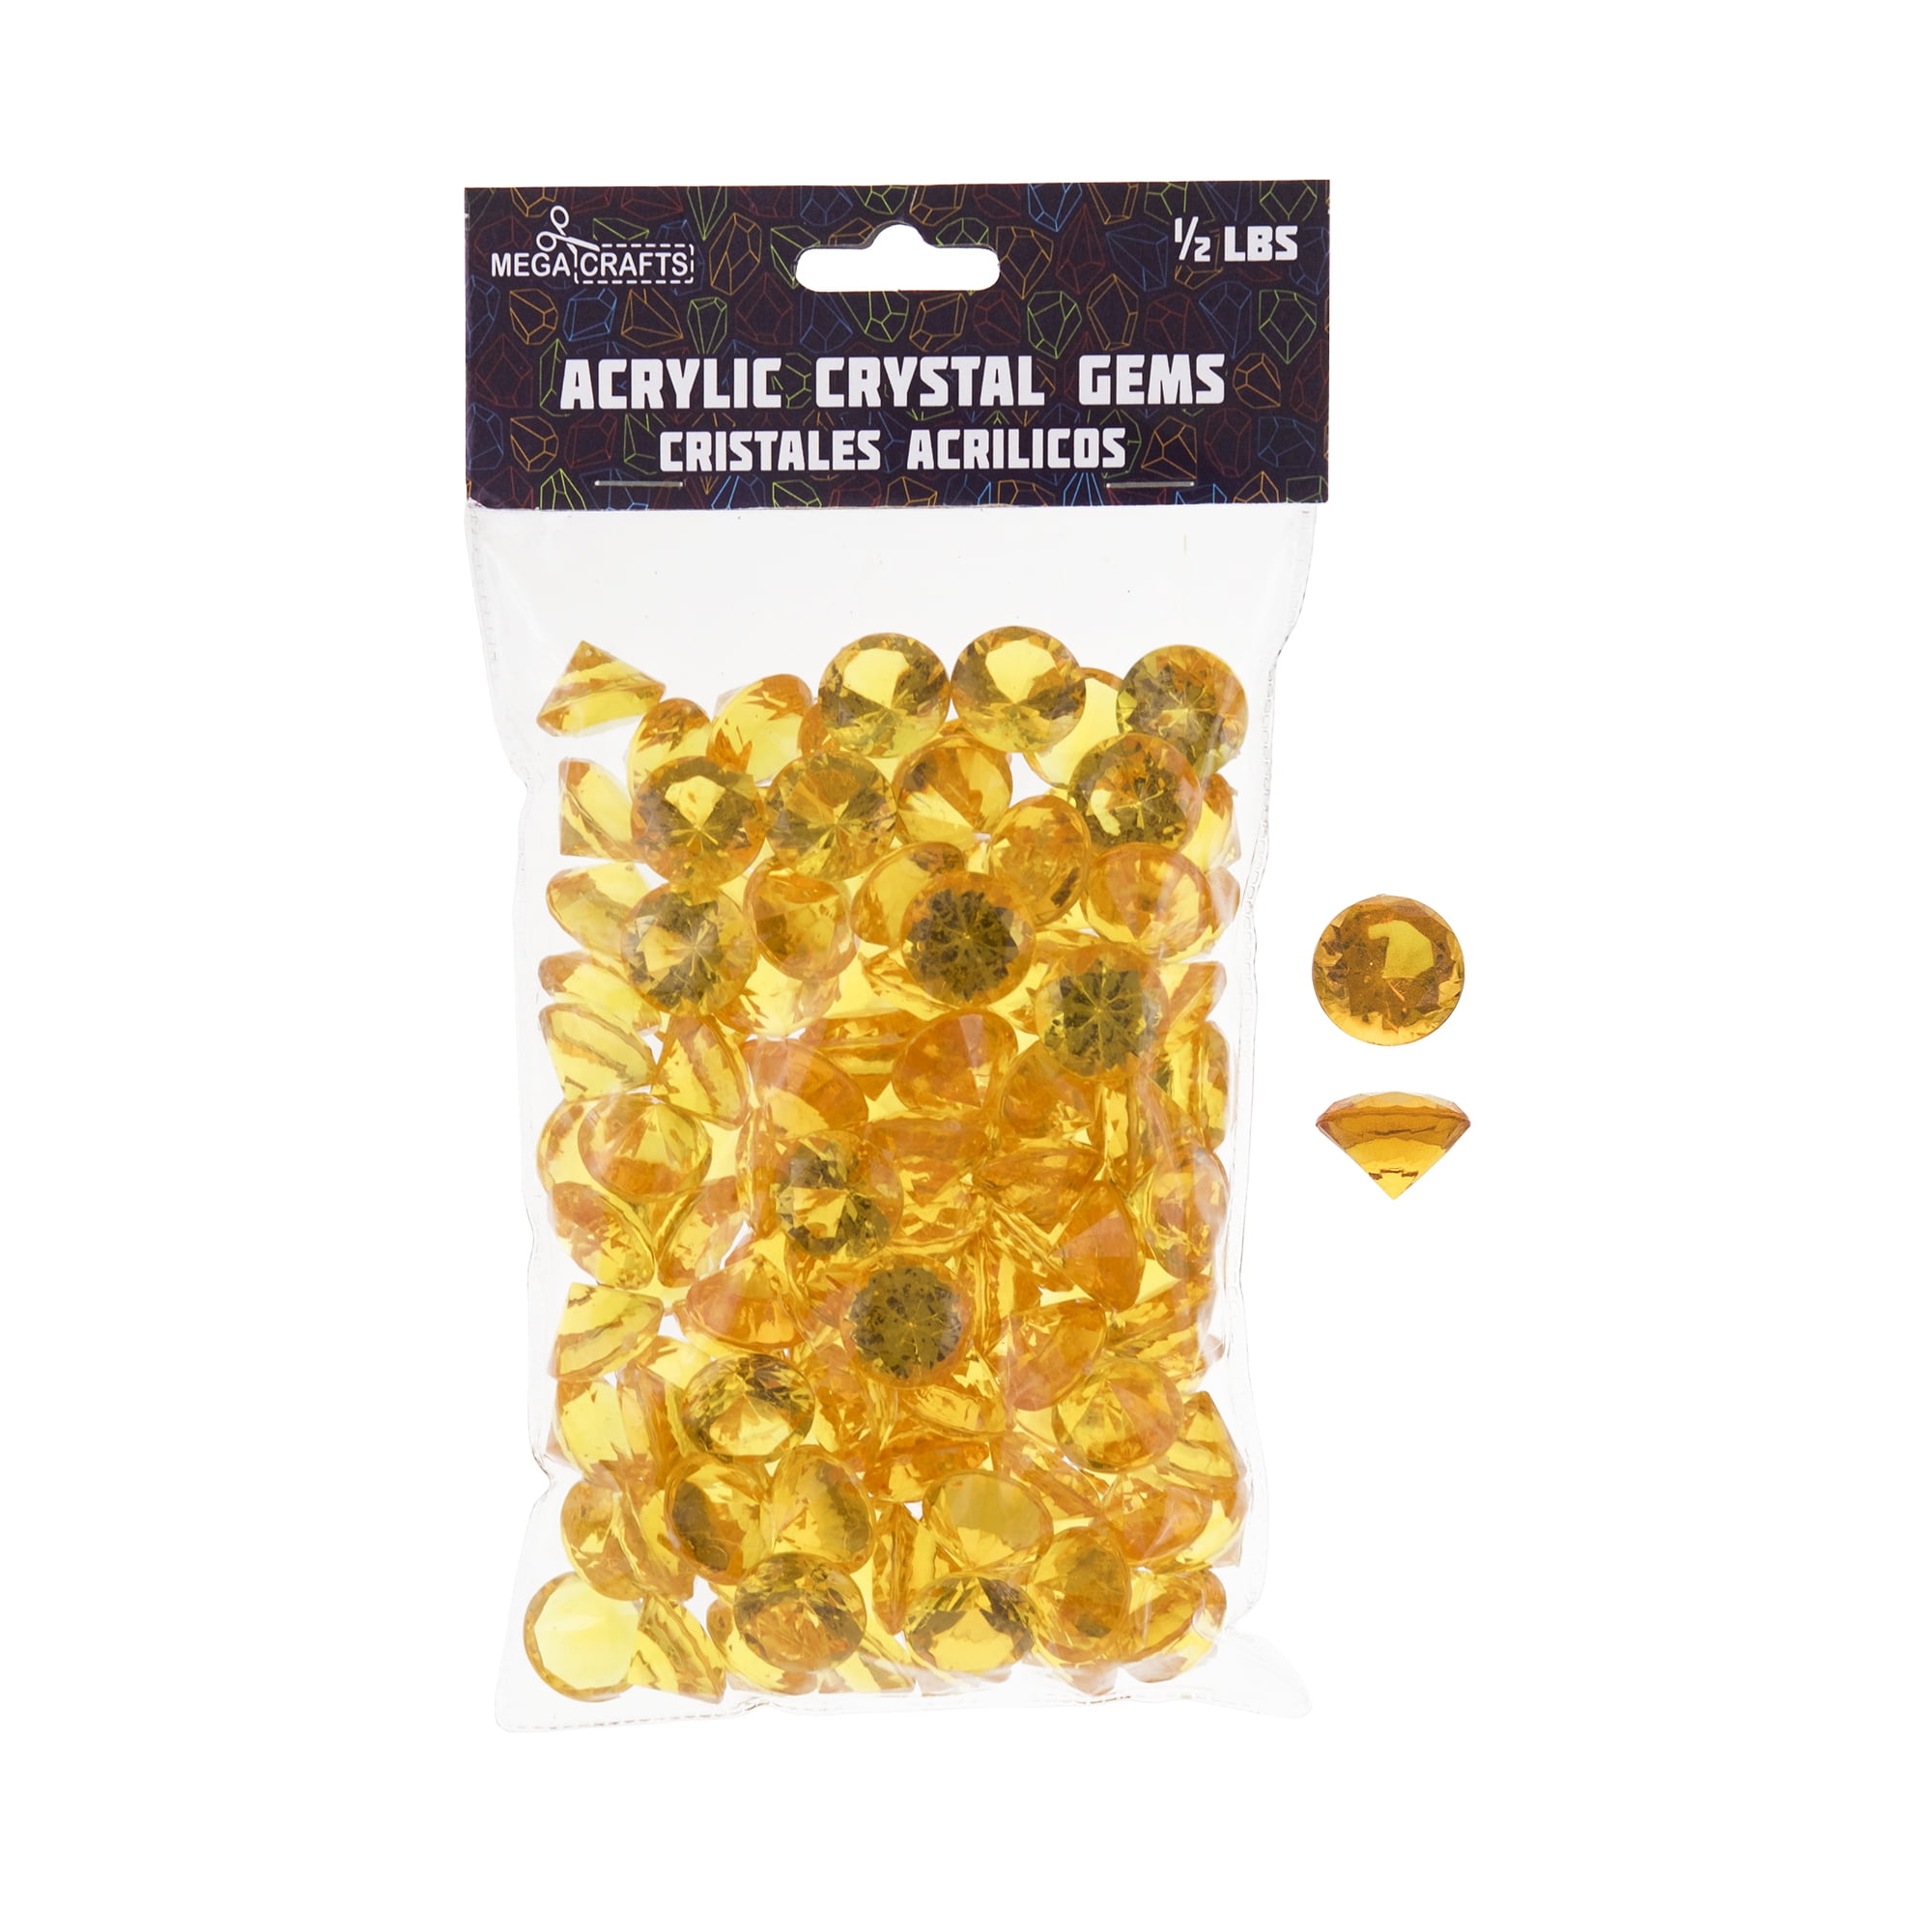 Mega Crafts - 1/2 lb Acrylic Gemstones Orange | Plastic Glass Gems for Arts and Crafts, Vase Fillers and Table Scatters, Decoration Stones, Shiny